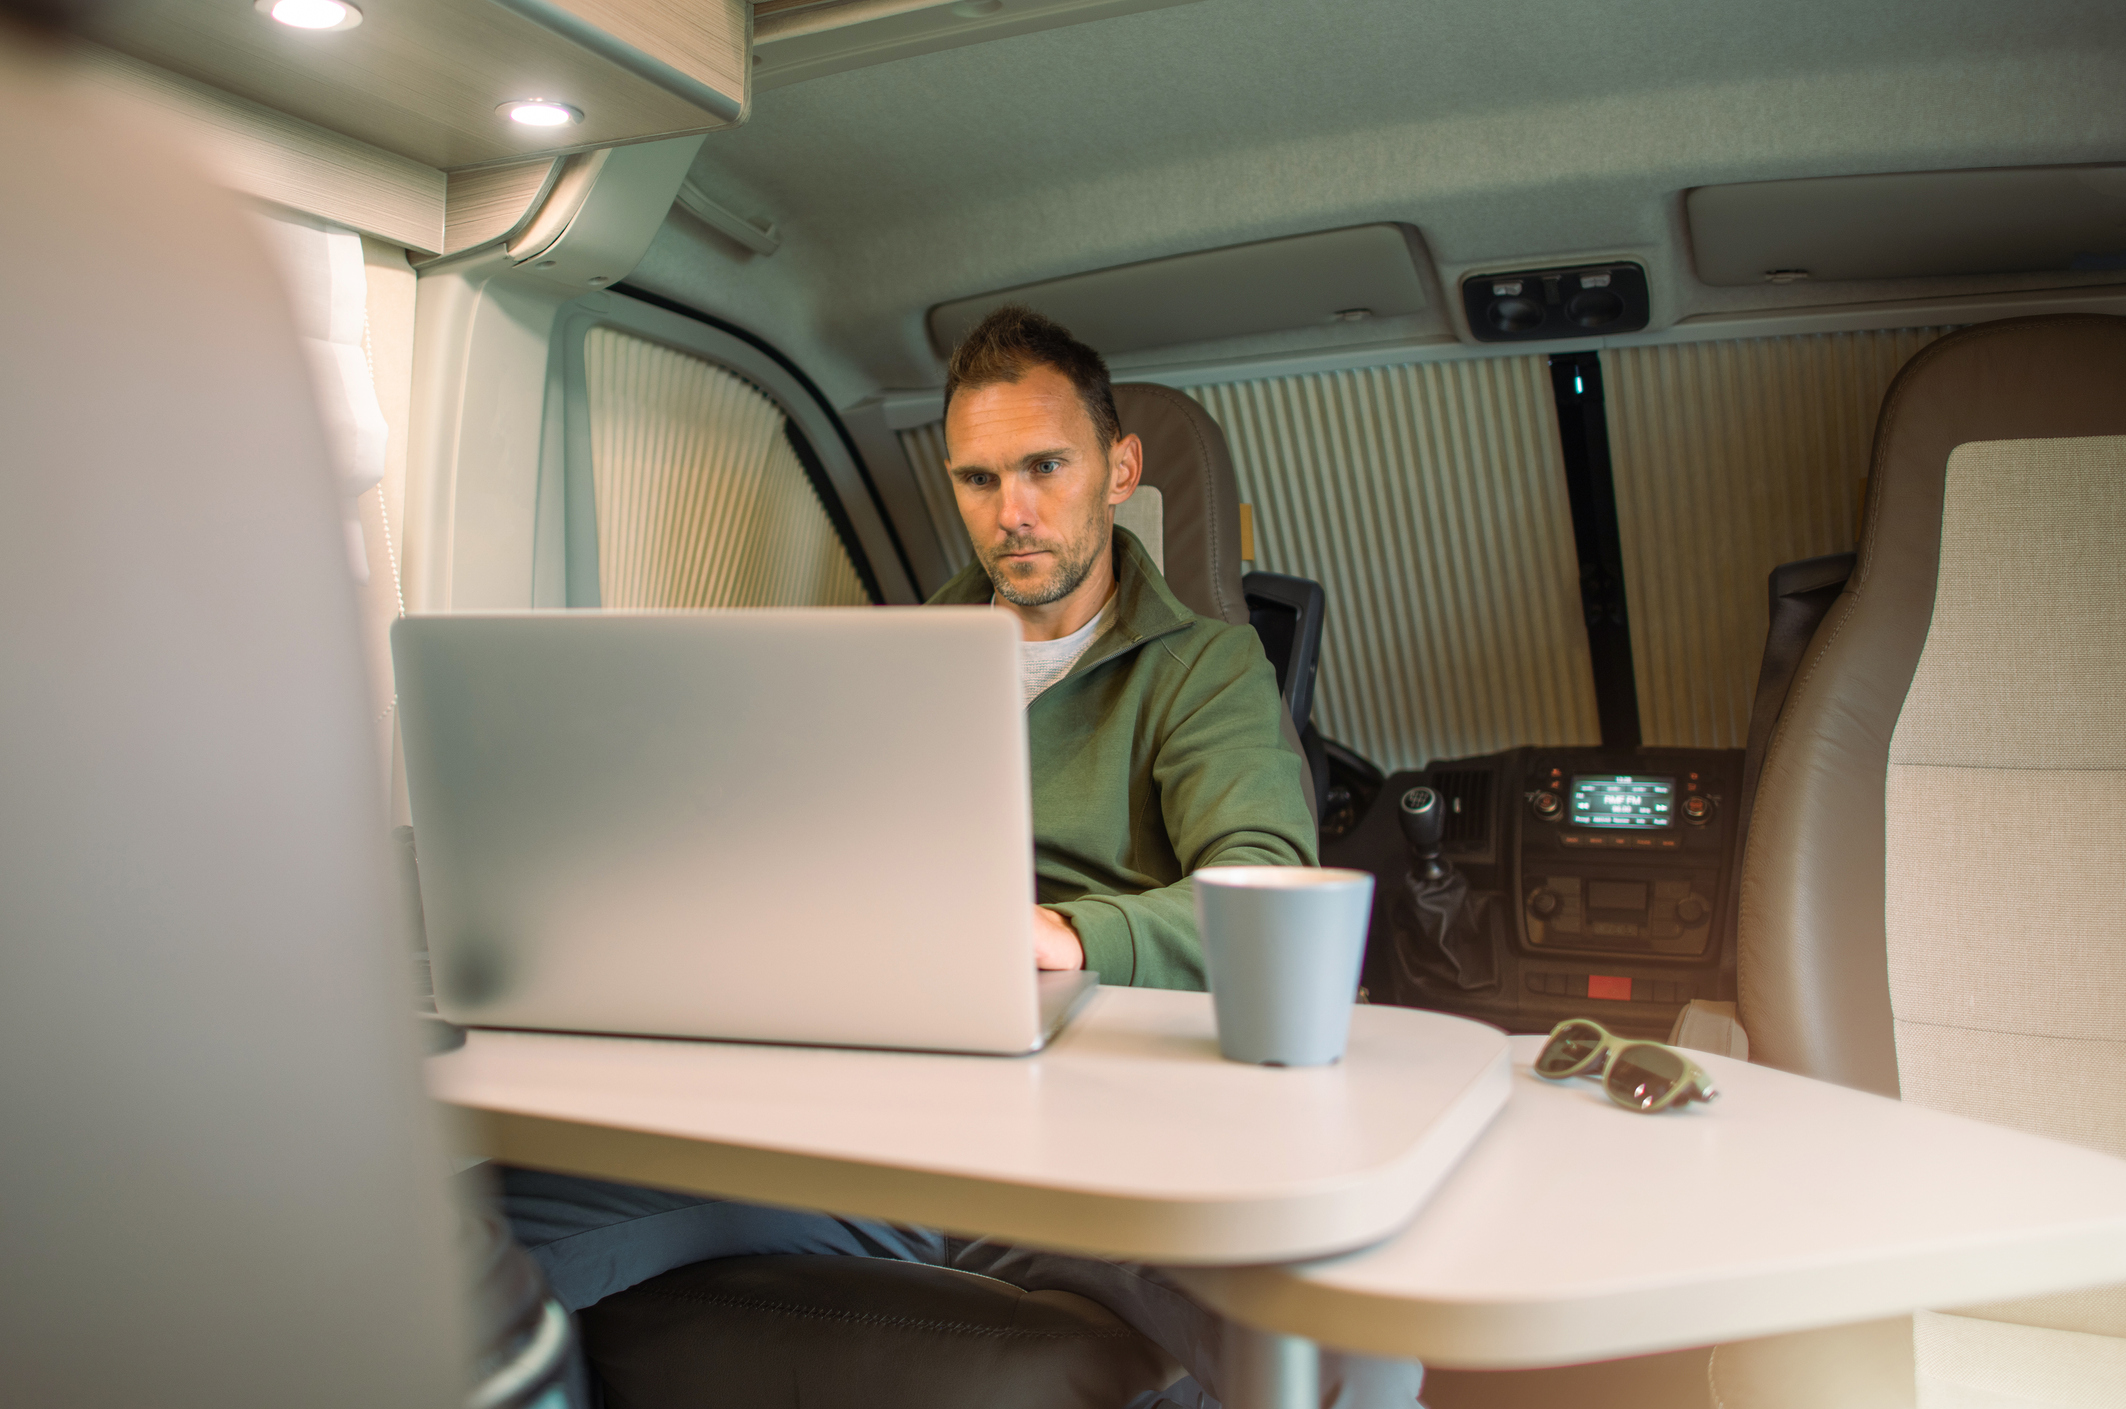 Caucasian Men in His 40s Working on His Computer Straight From His Camper Van While on a Road Trip. Remote Working Theme.